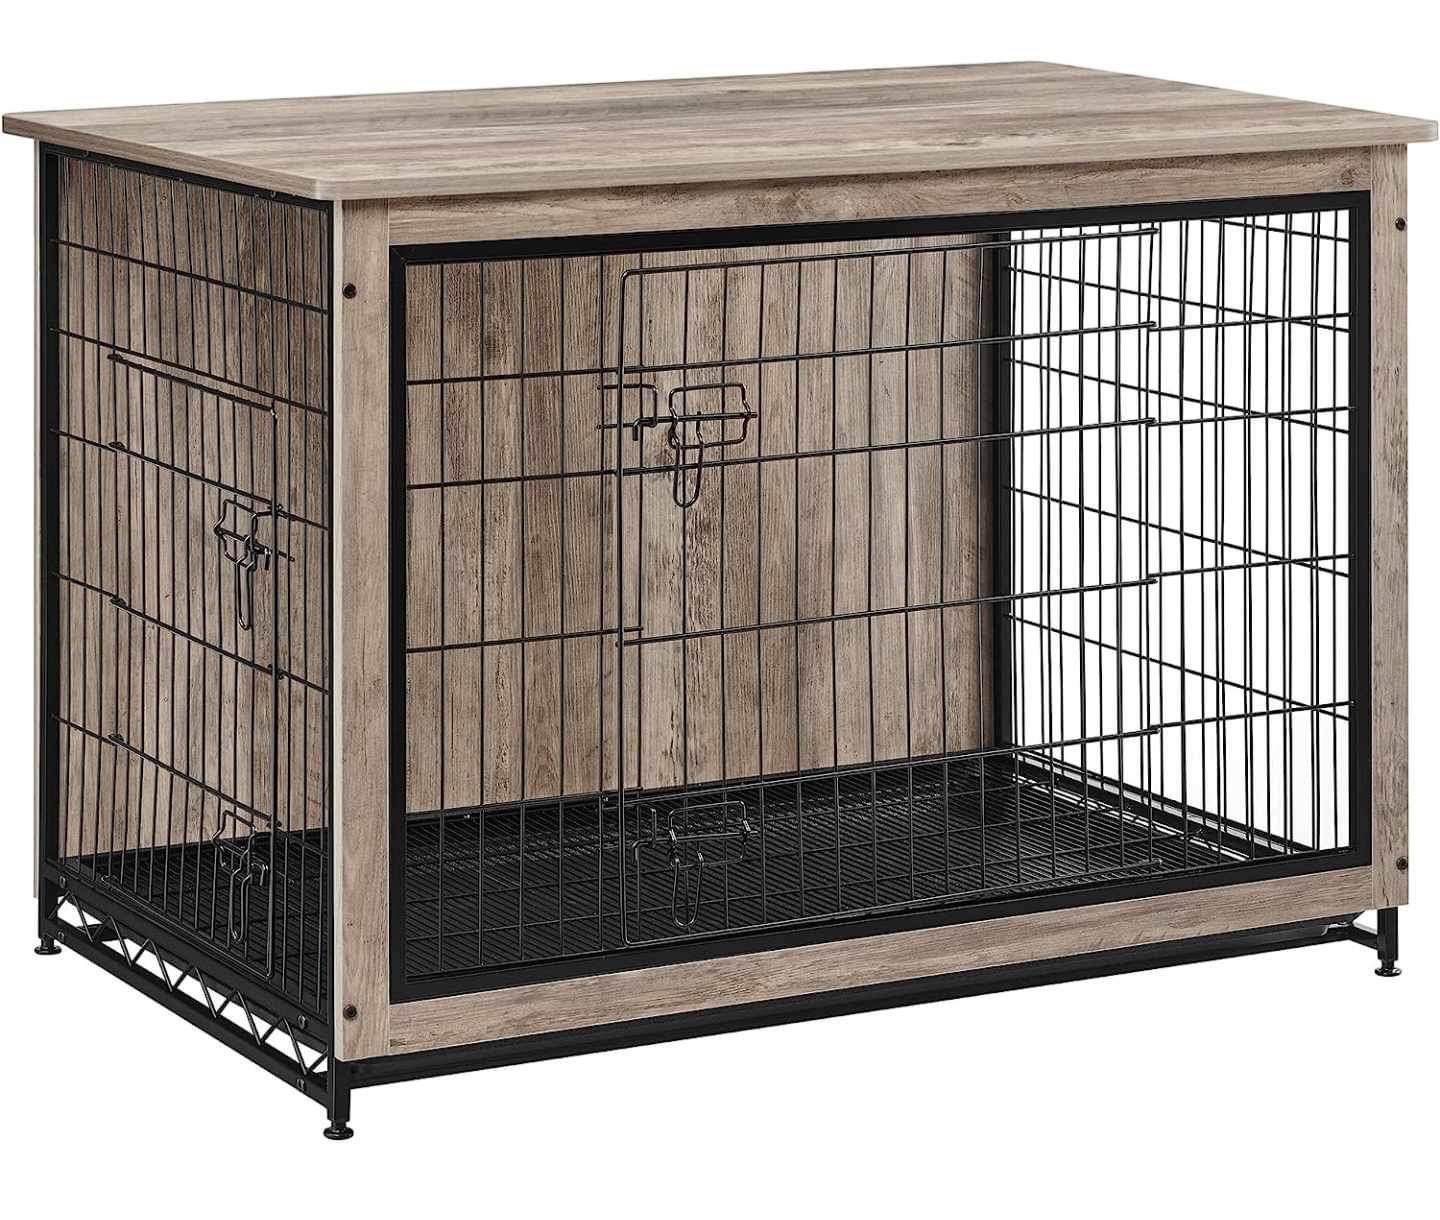 Feandrea Dog Crate Furniture, Side End Table, Modern Kennel for Dogs Indoor 44.1"L x 29.5"W x 32.3"H